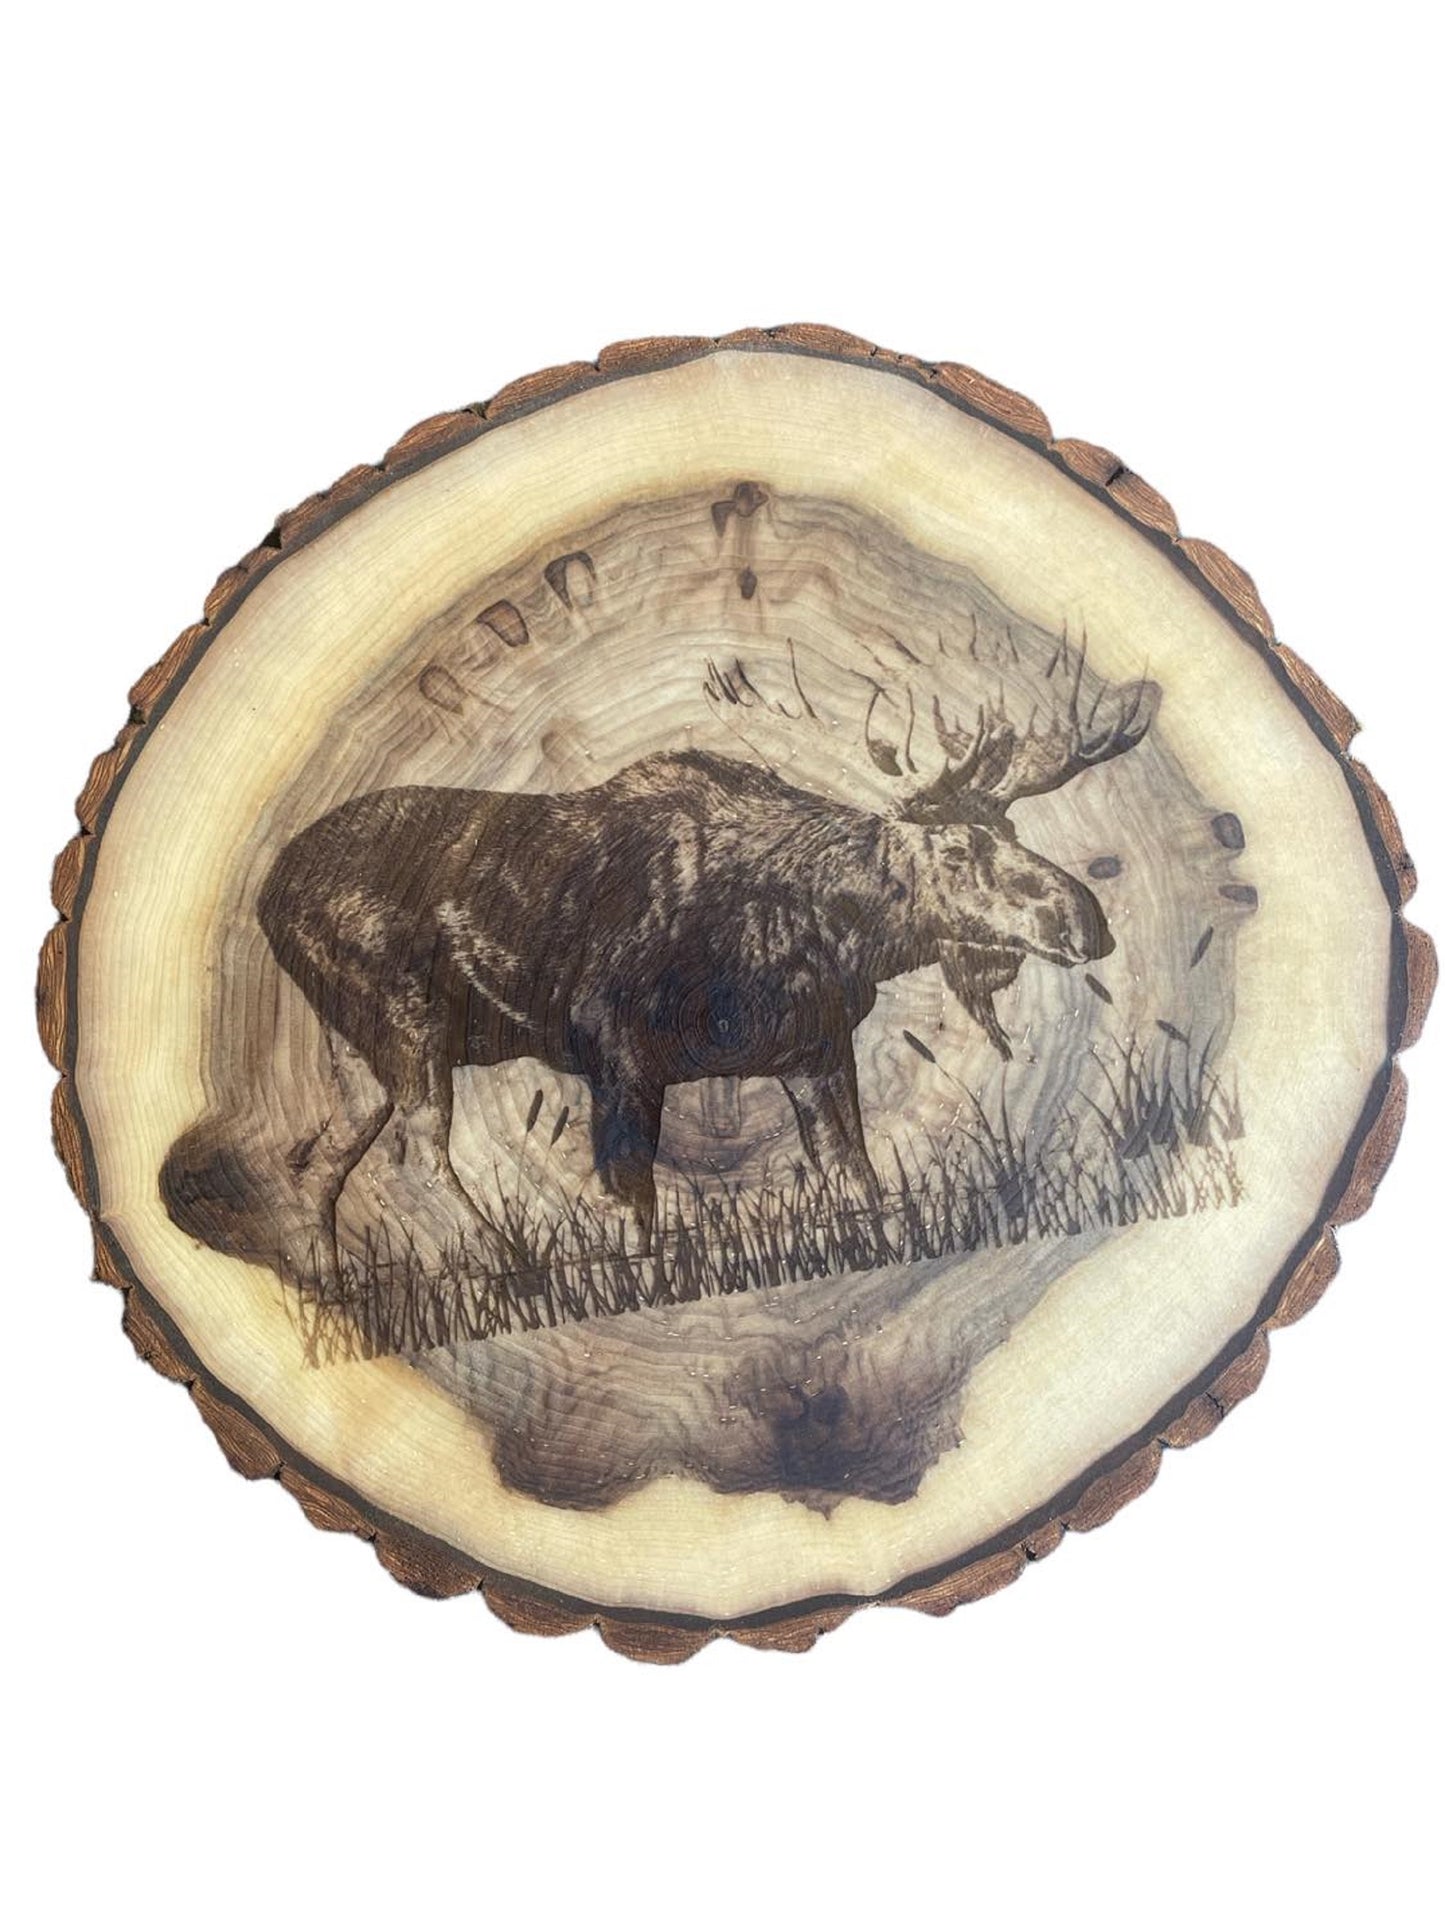 Moose Engraved Rustic Slab Charcuterie board, Cake Stand, Cutting Board, Food Serving, or Center Piece, NO Legs, With Bark